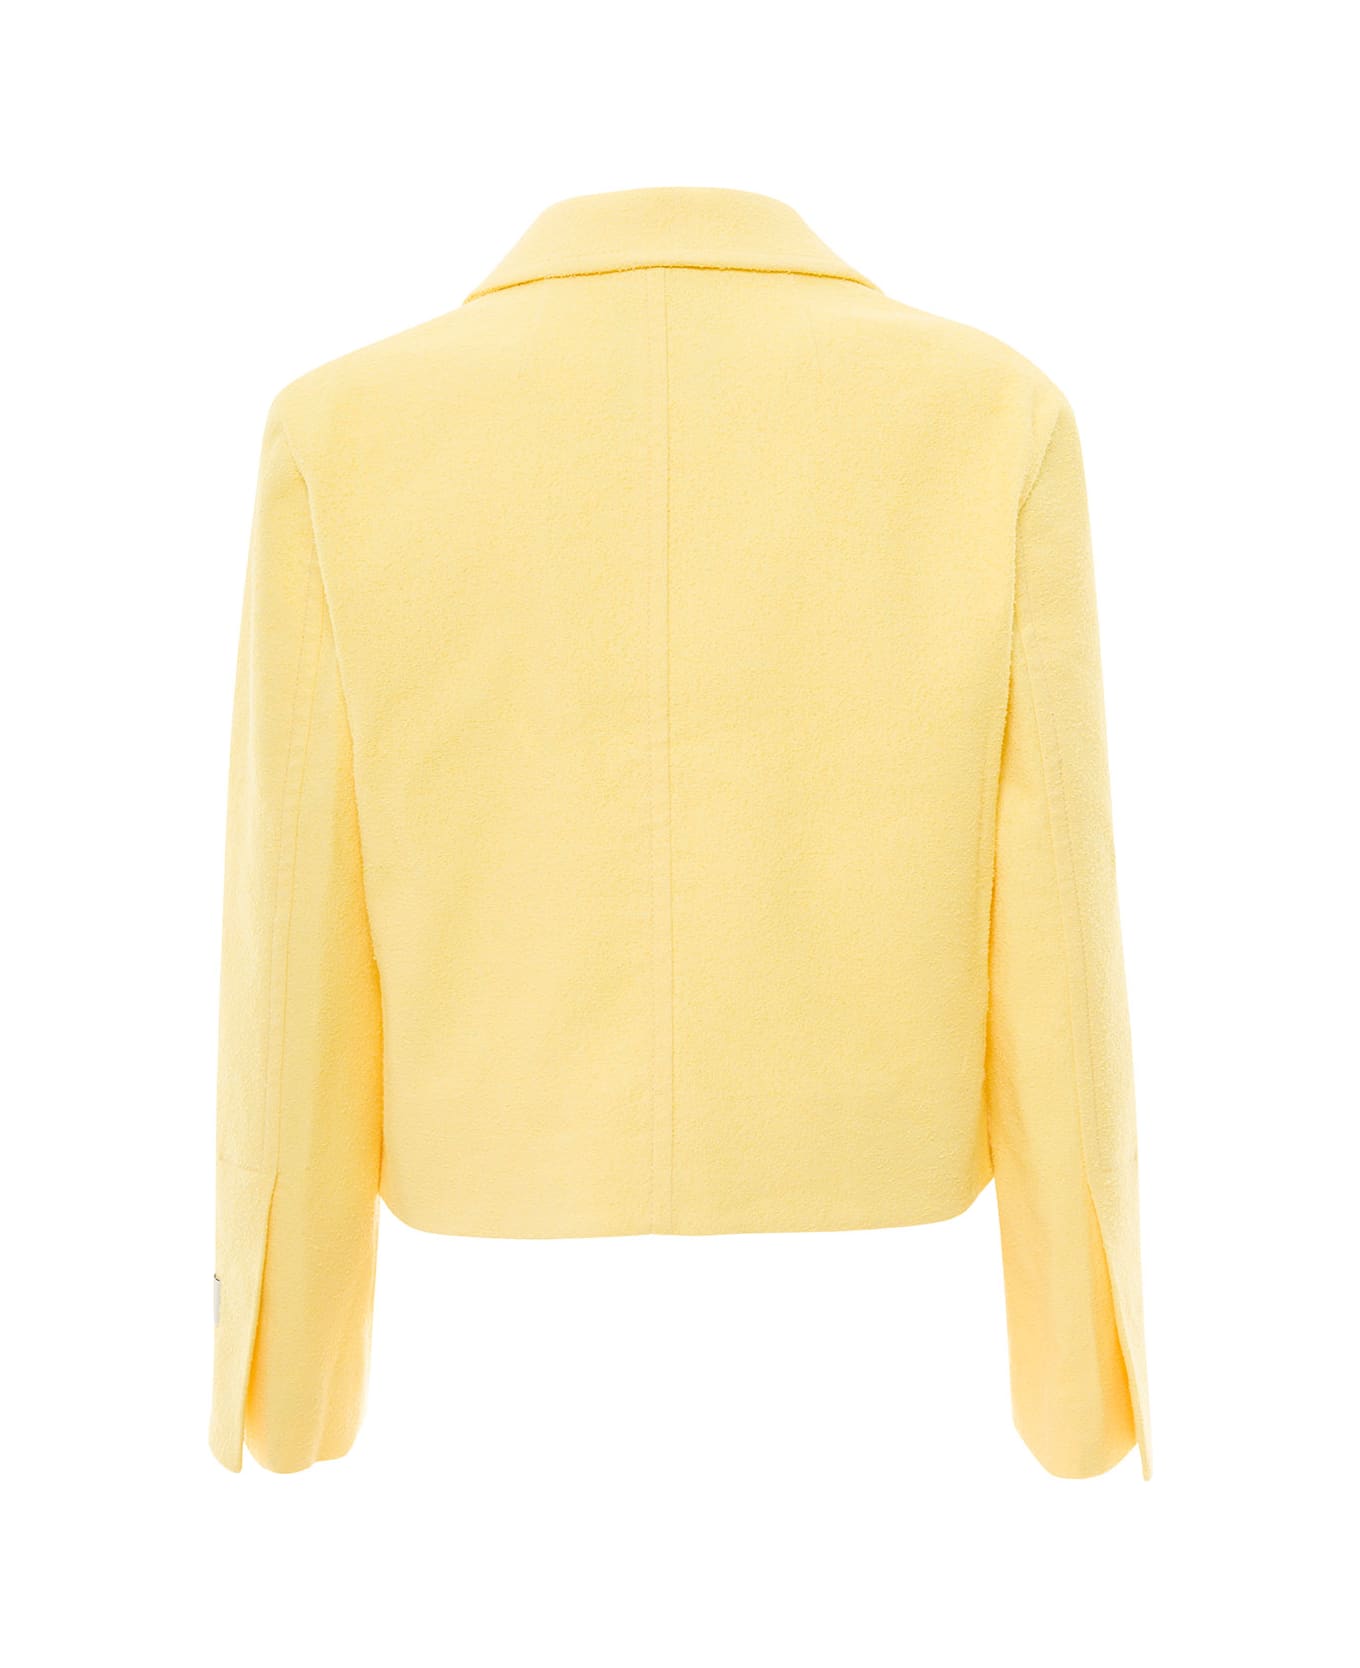 Patou Yellow Jacket With Branded Buttons In Cotton Blend Tweed Woman - Yellow ジャケット